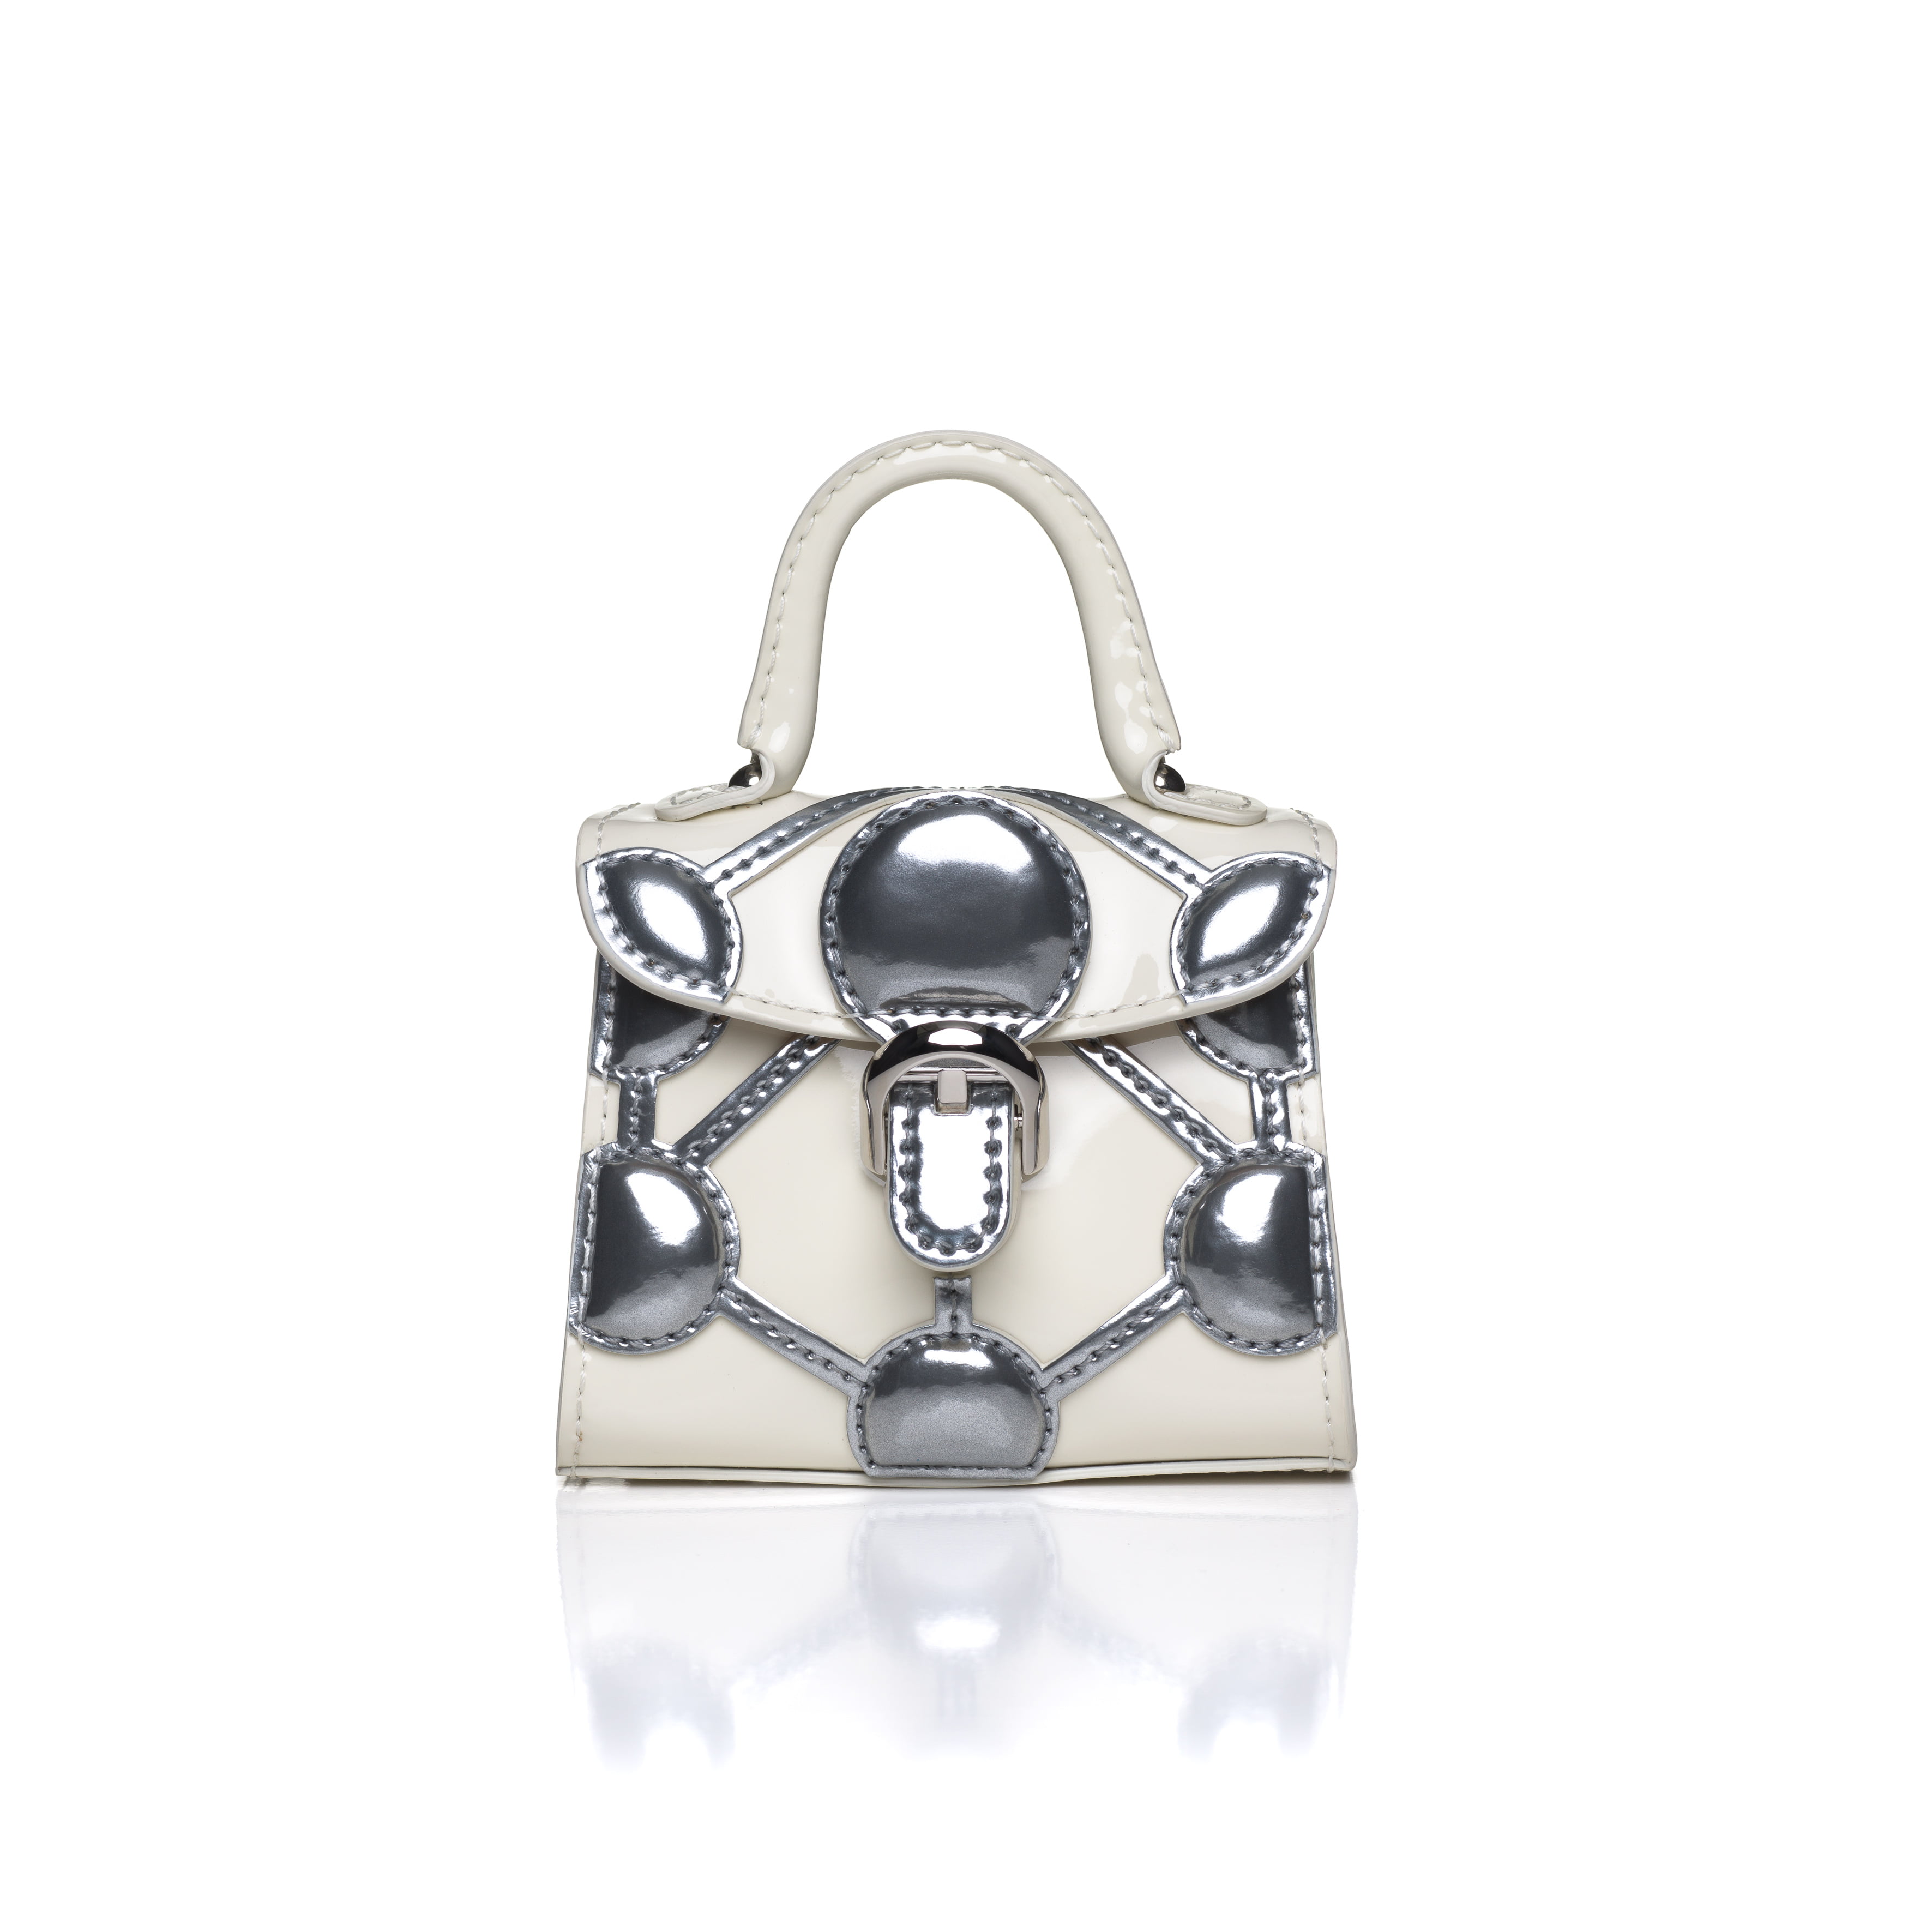 Delvaux Brillant Miniature Jewel of bag Collector 2018 - Katheley's